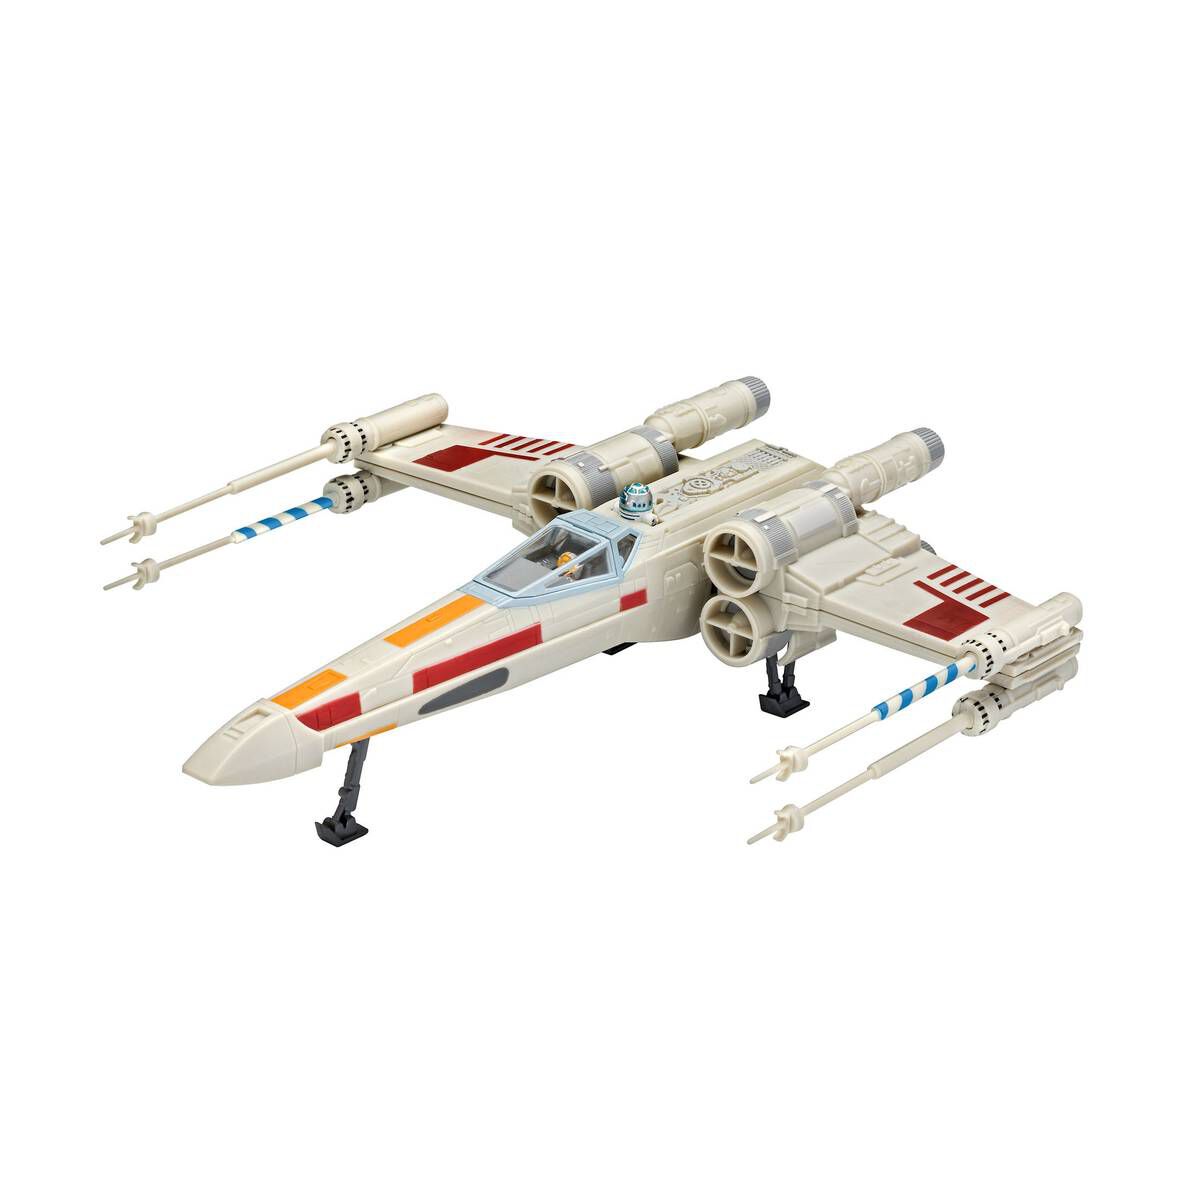 Revell Star Wars X-Wing Fighter - Loaded Dice Barry Vale of Glamorgan CF64 3HD